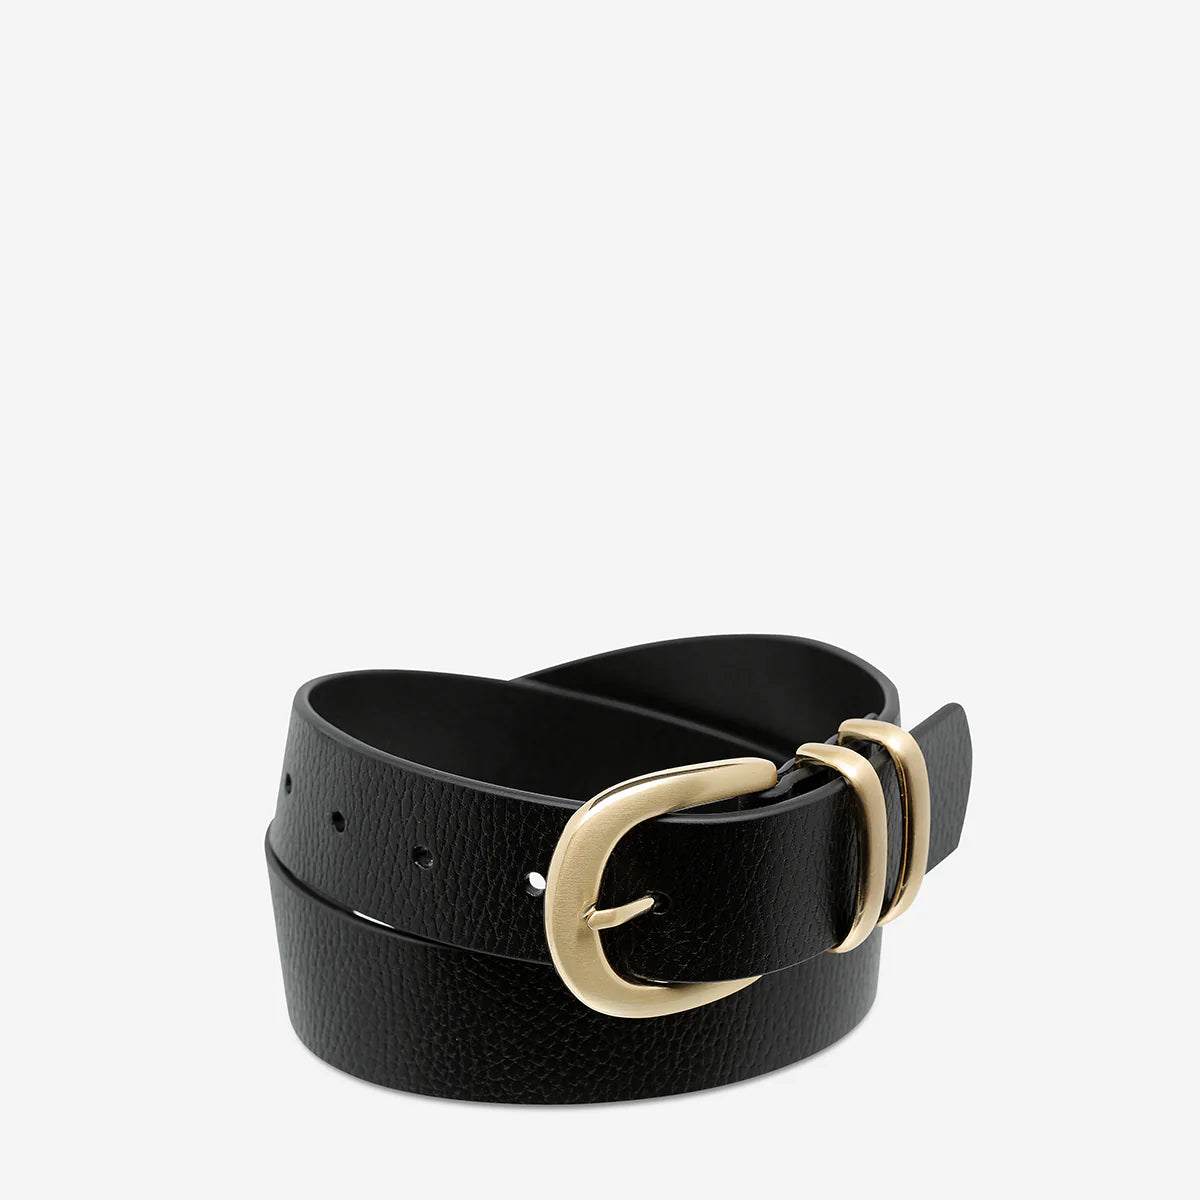 Status Anxiety Belt - let it be - black/gold